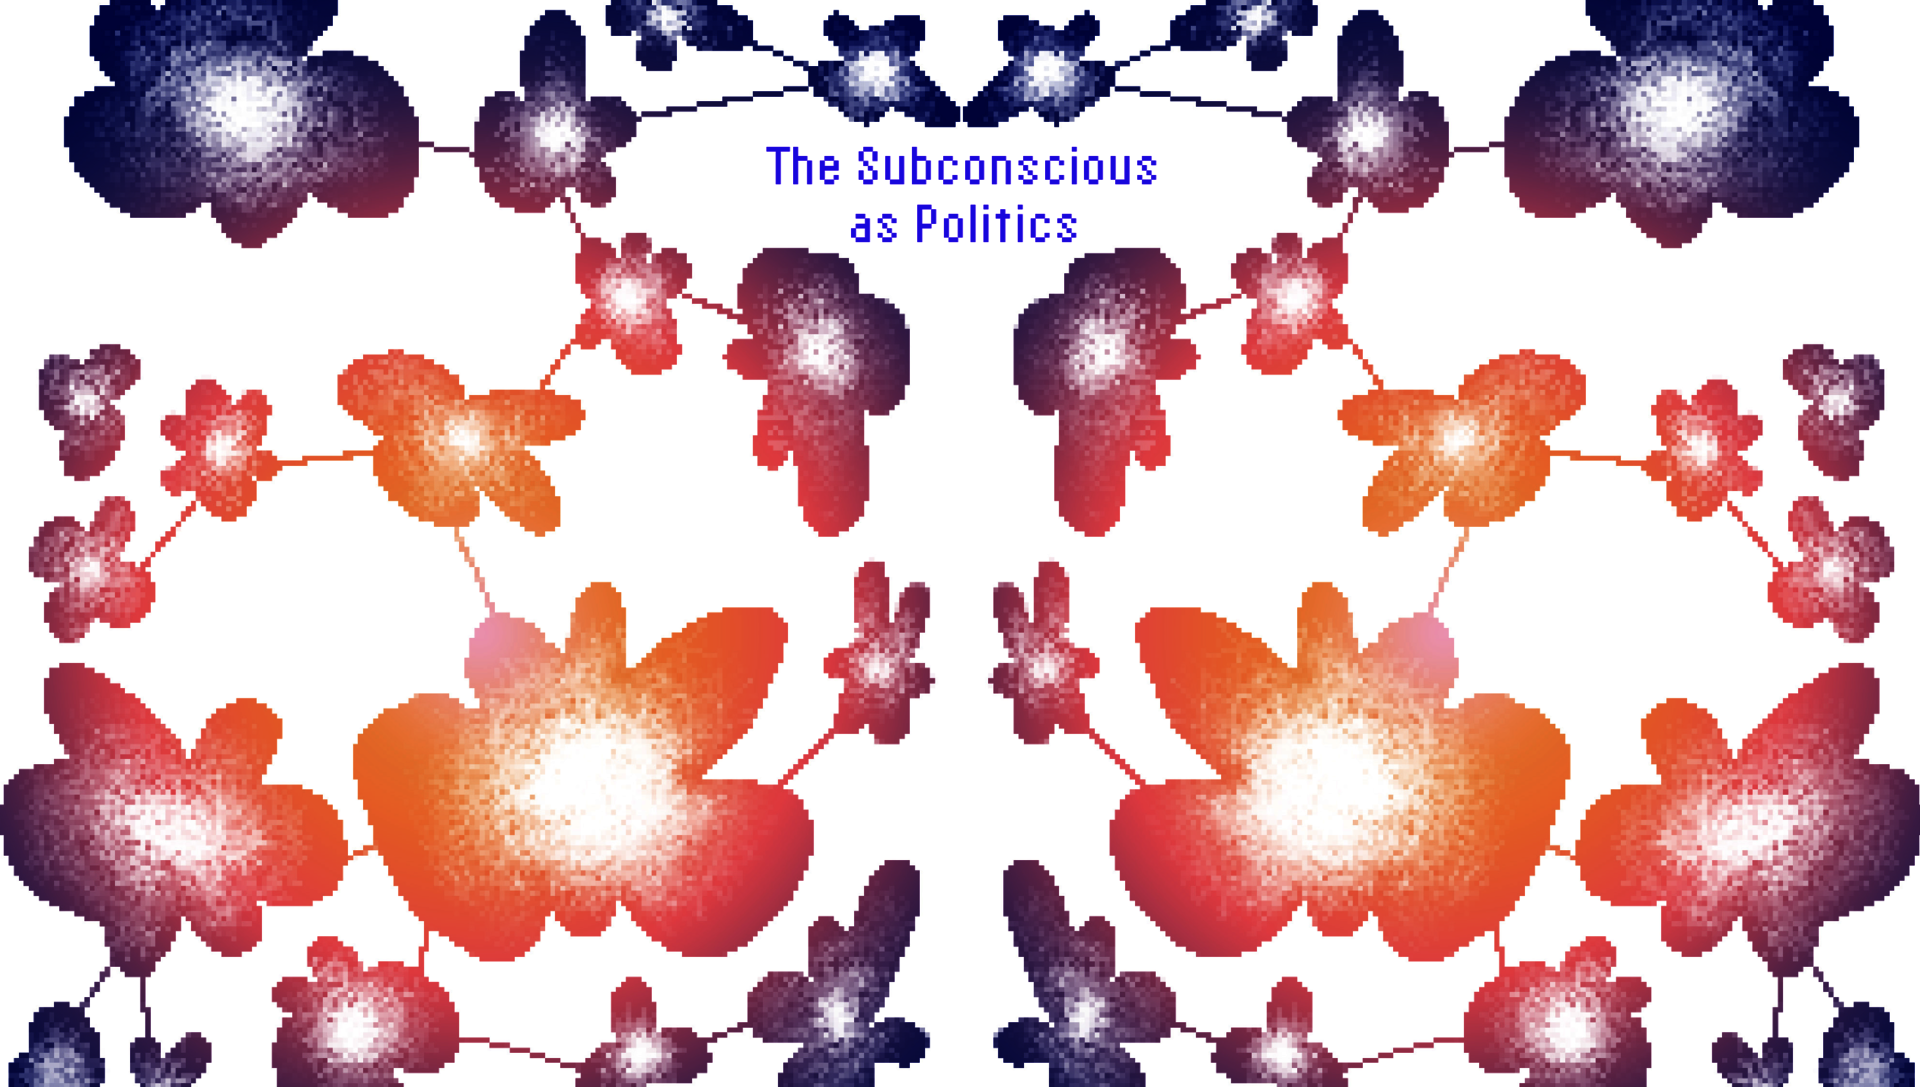 Pixelated flower-shaped nodes connect with each other in a symmetrical pattern. In the midst of them there is the title "The Subconscious as Politics".